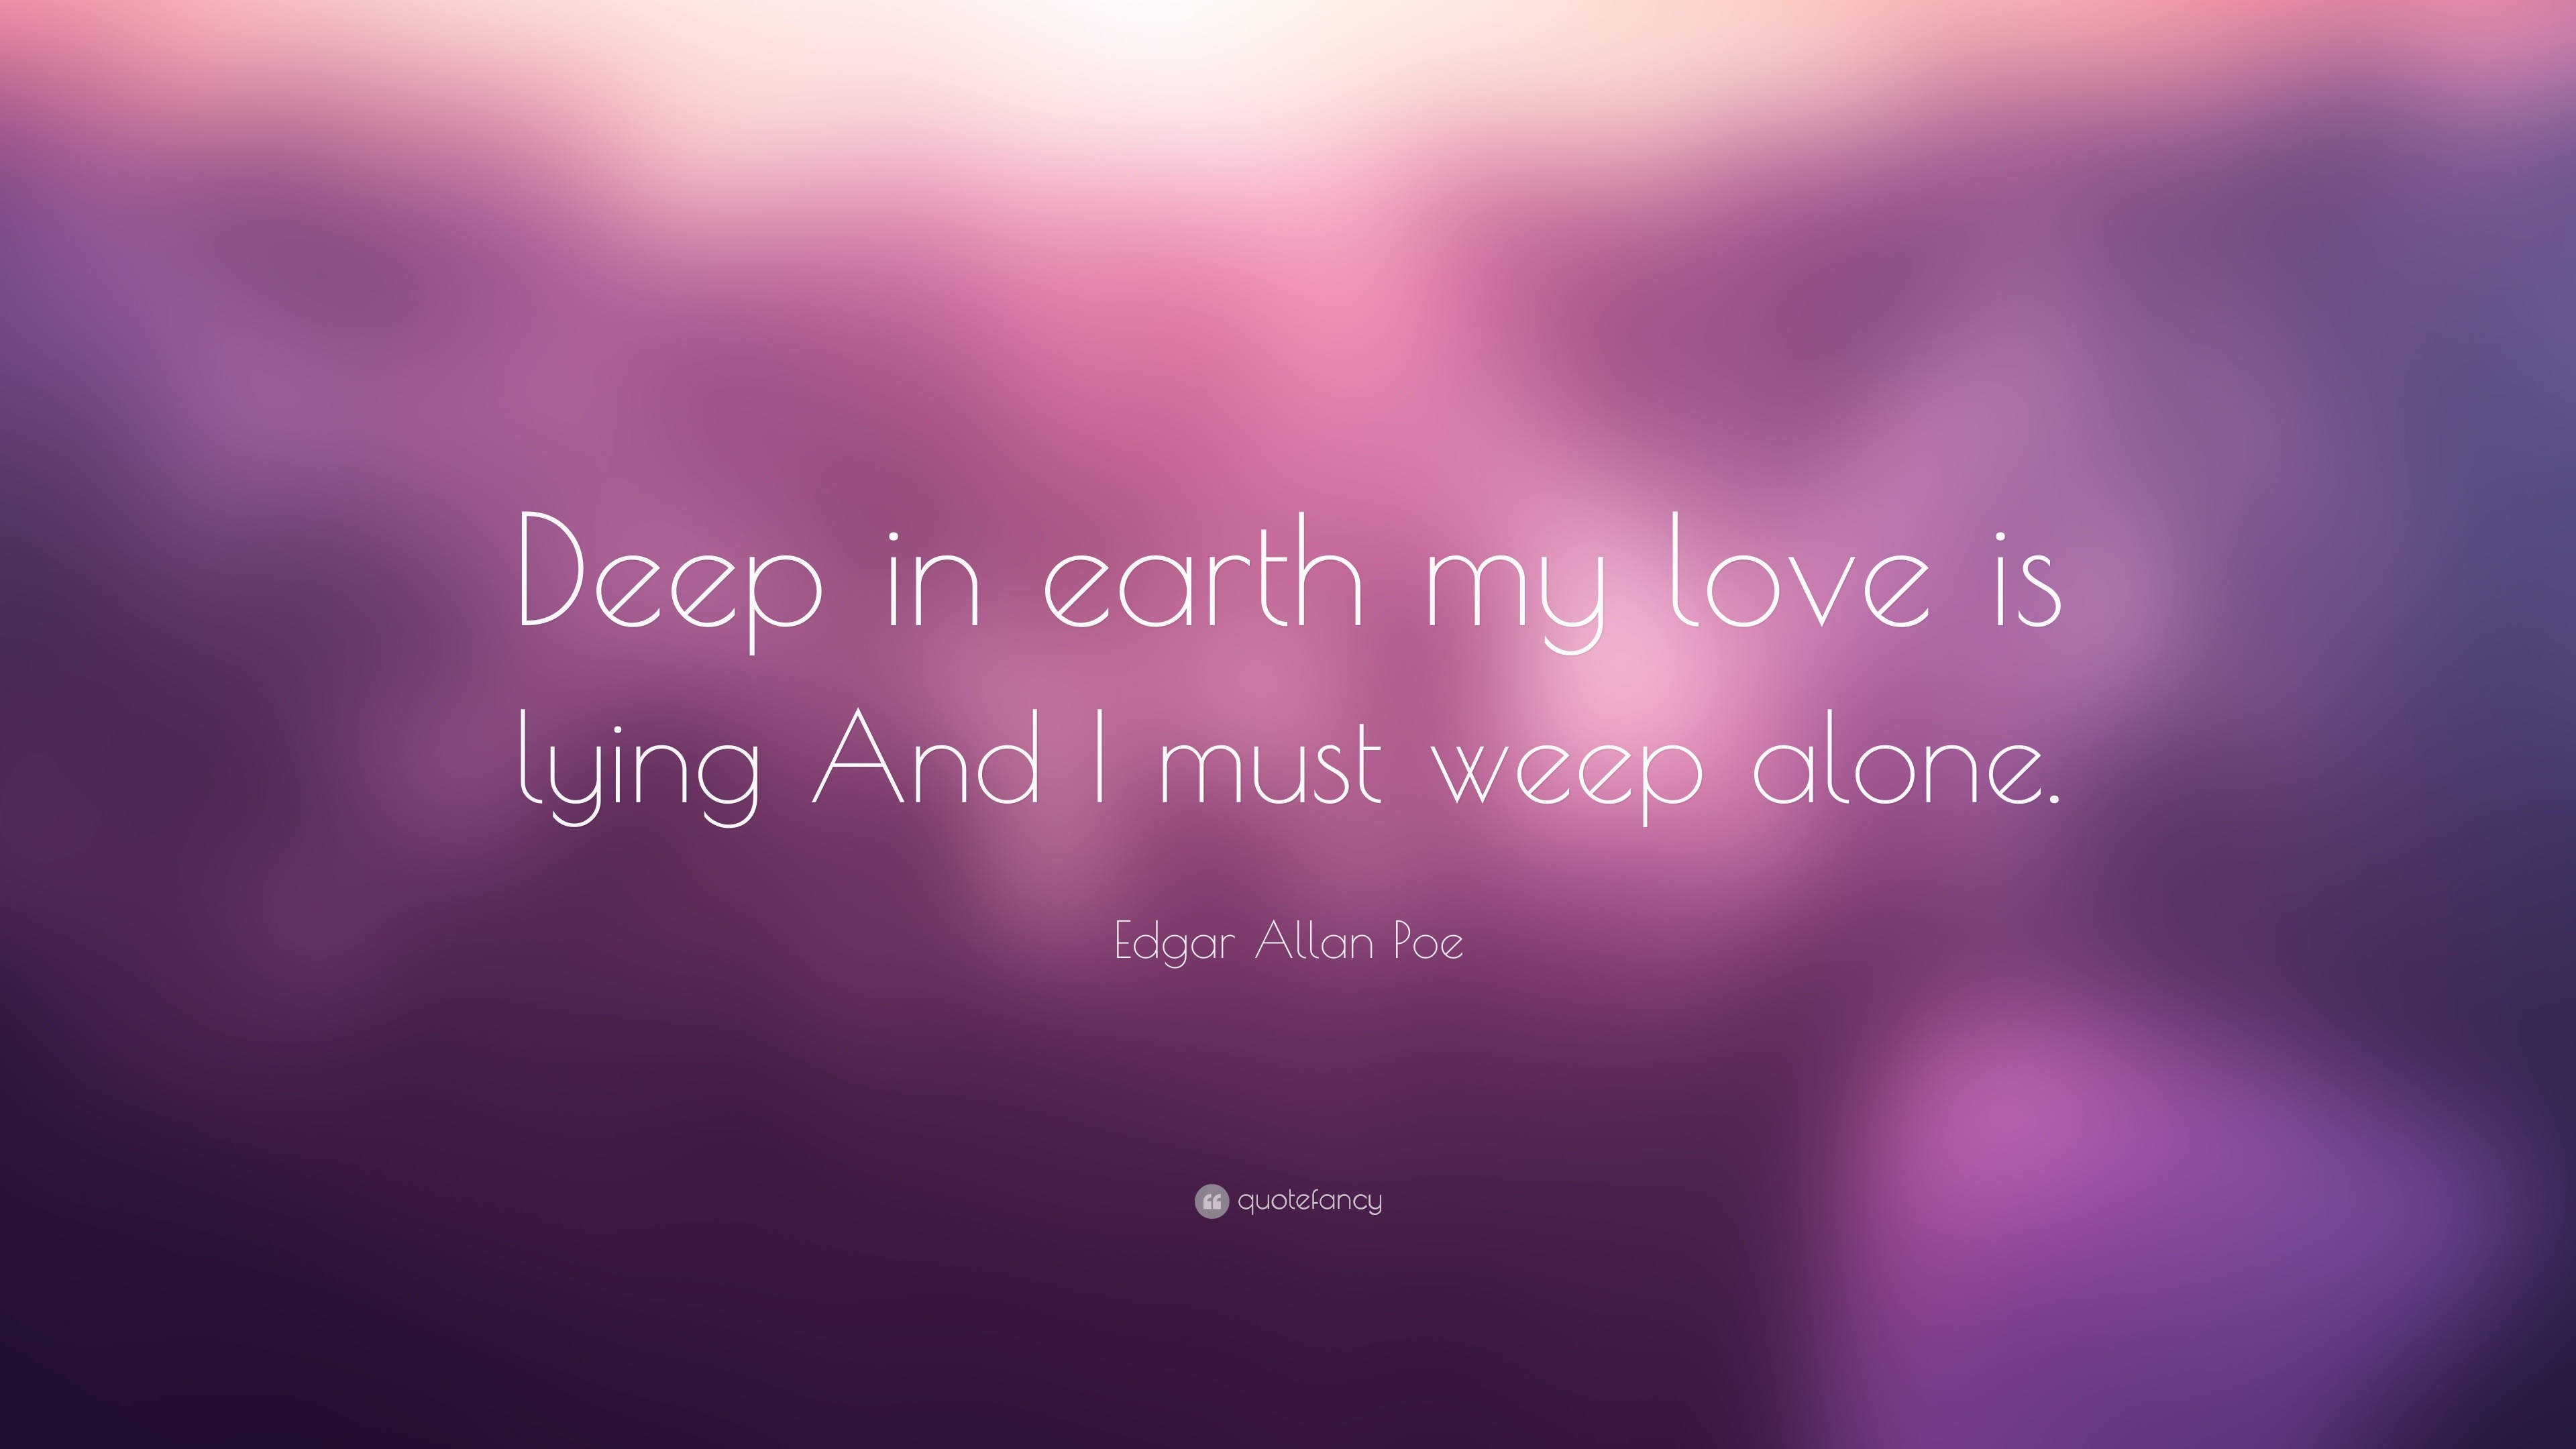 Edgar Allan Poe Quote: “Deep in earth my love is lying And I must weep ...